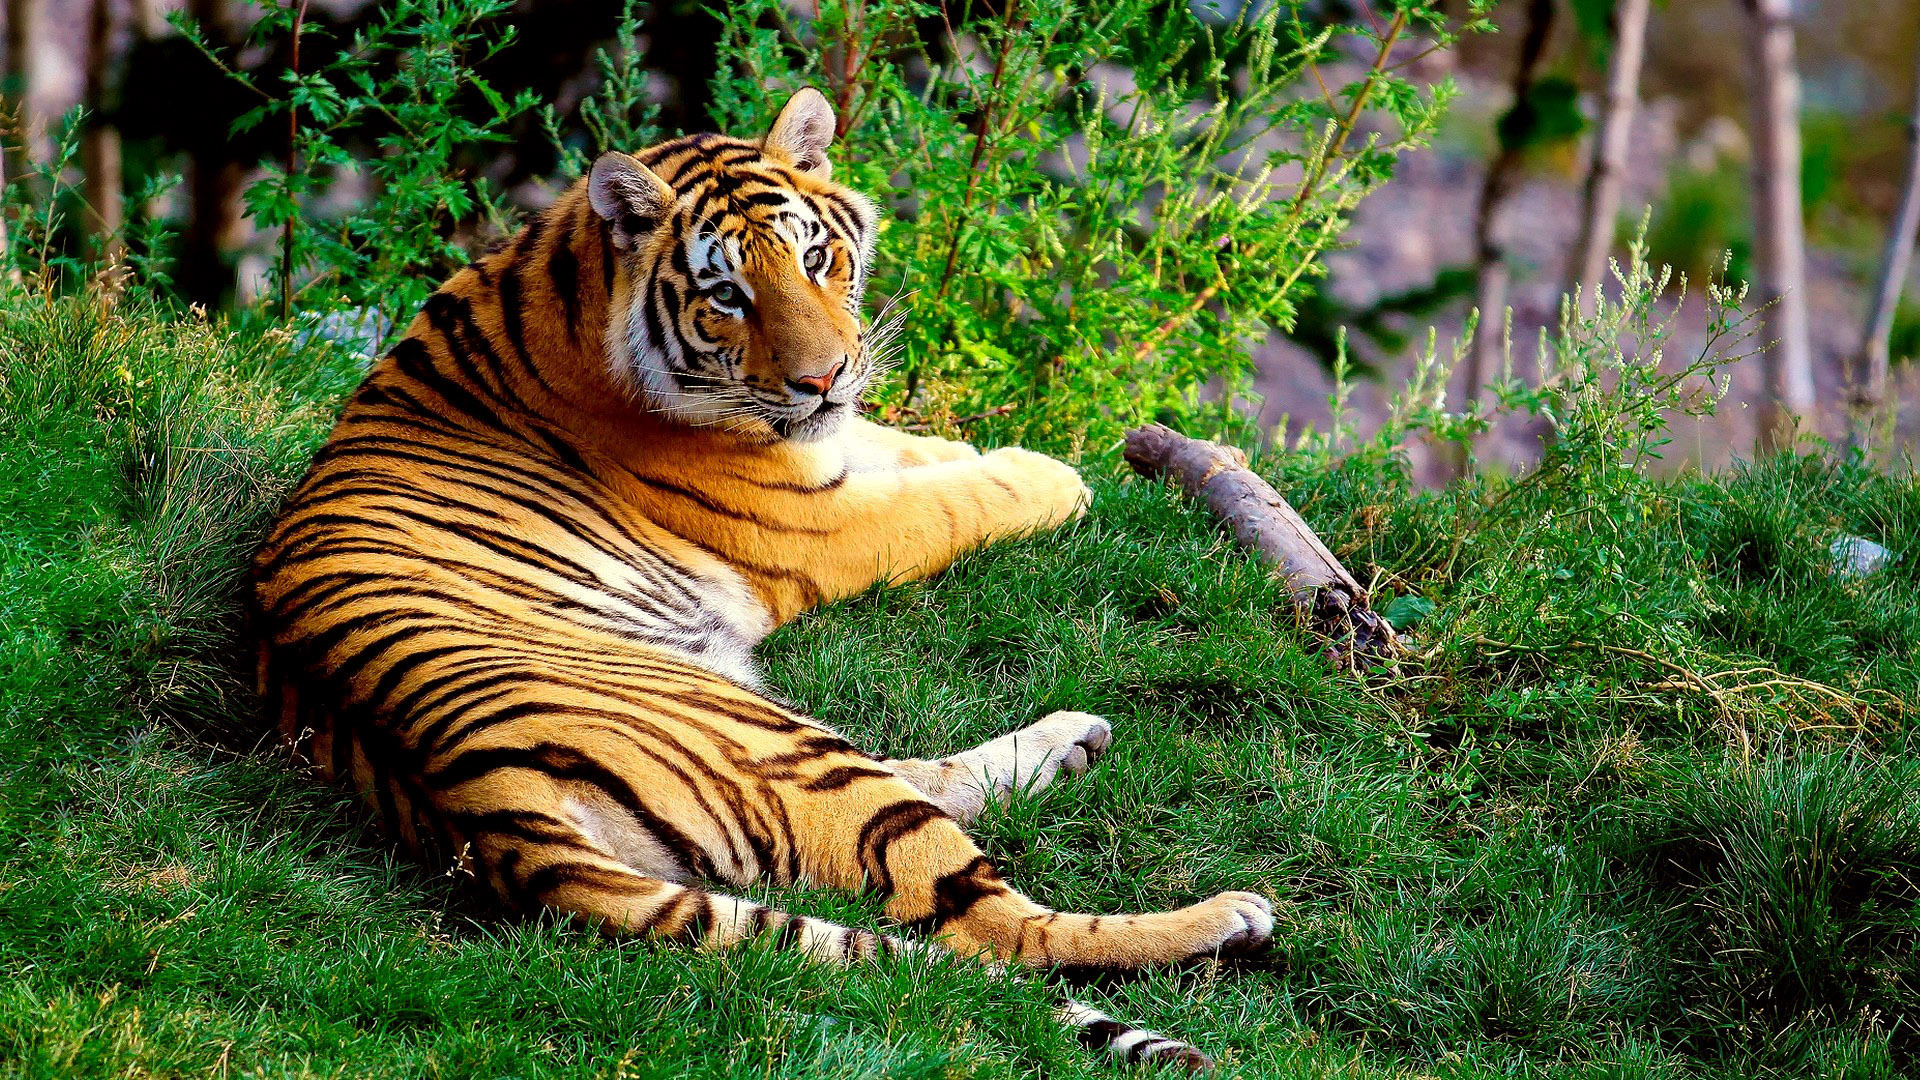 animals, Cats, Tigers, Stripes, Color, Pattern, Wildlife, Predator, Landscapes, Grass, Green, Plants, Trees, Contrast Wallpaper